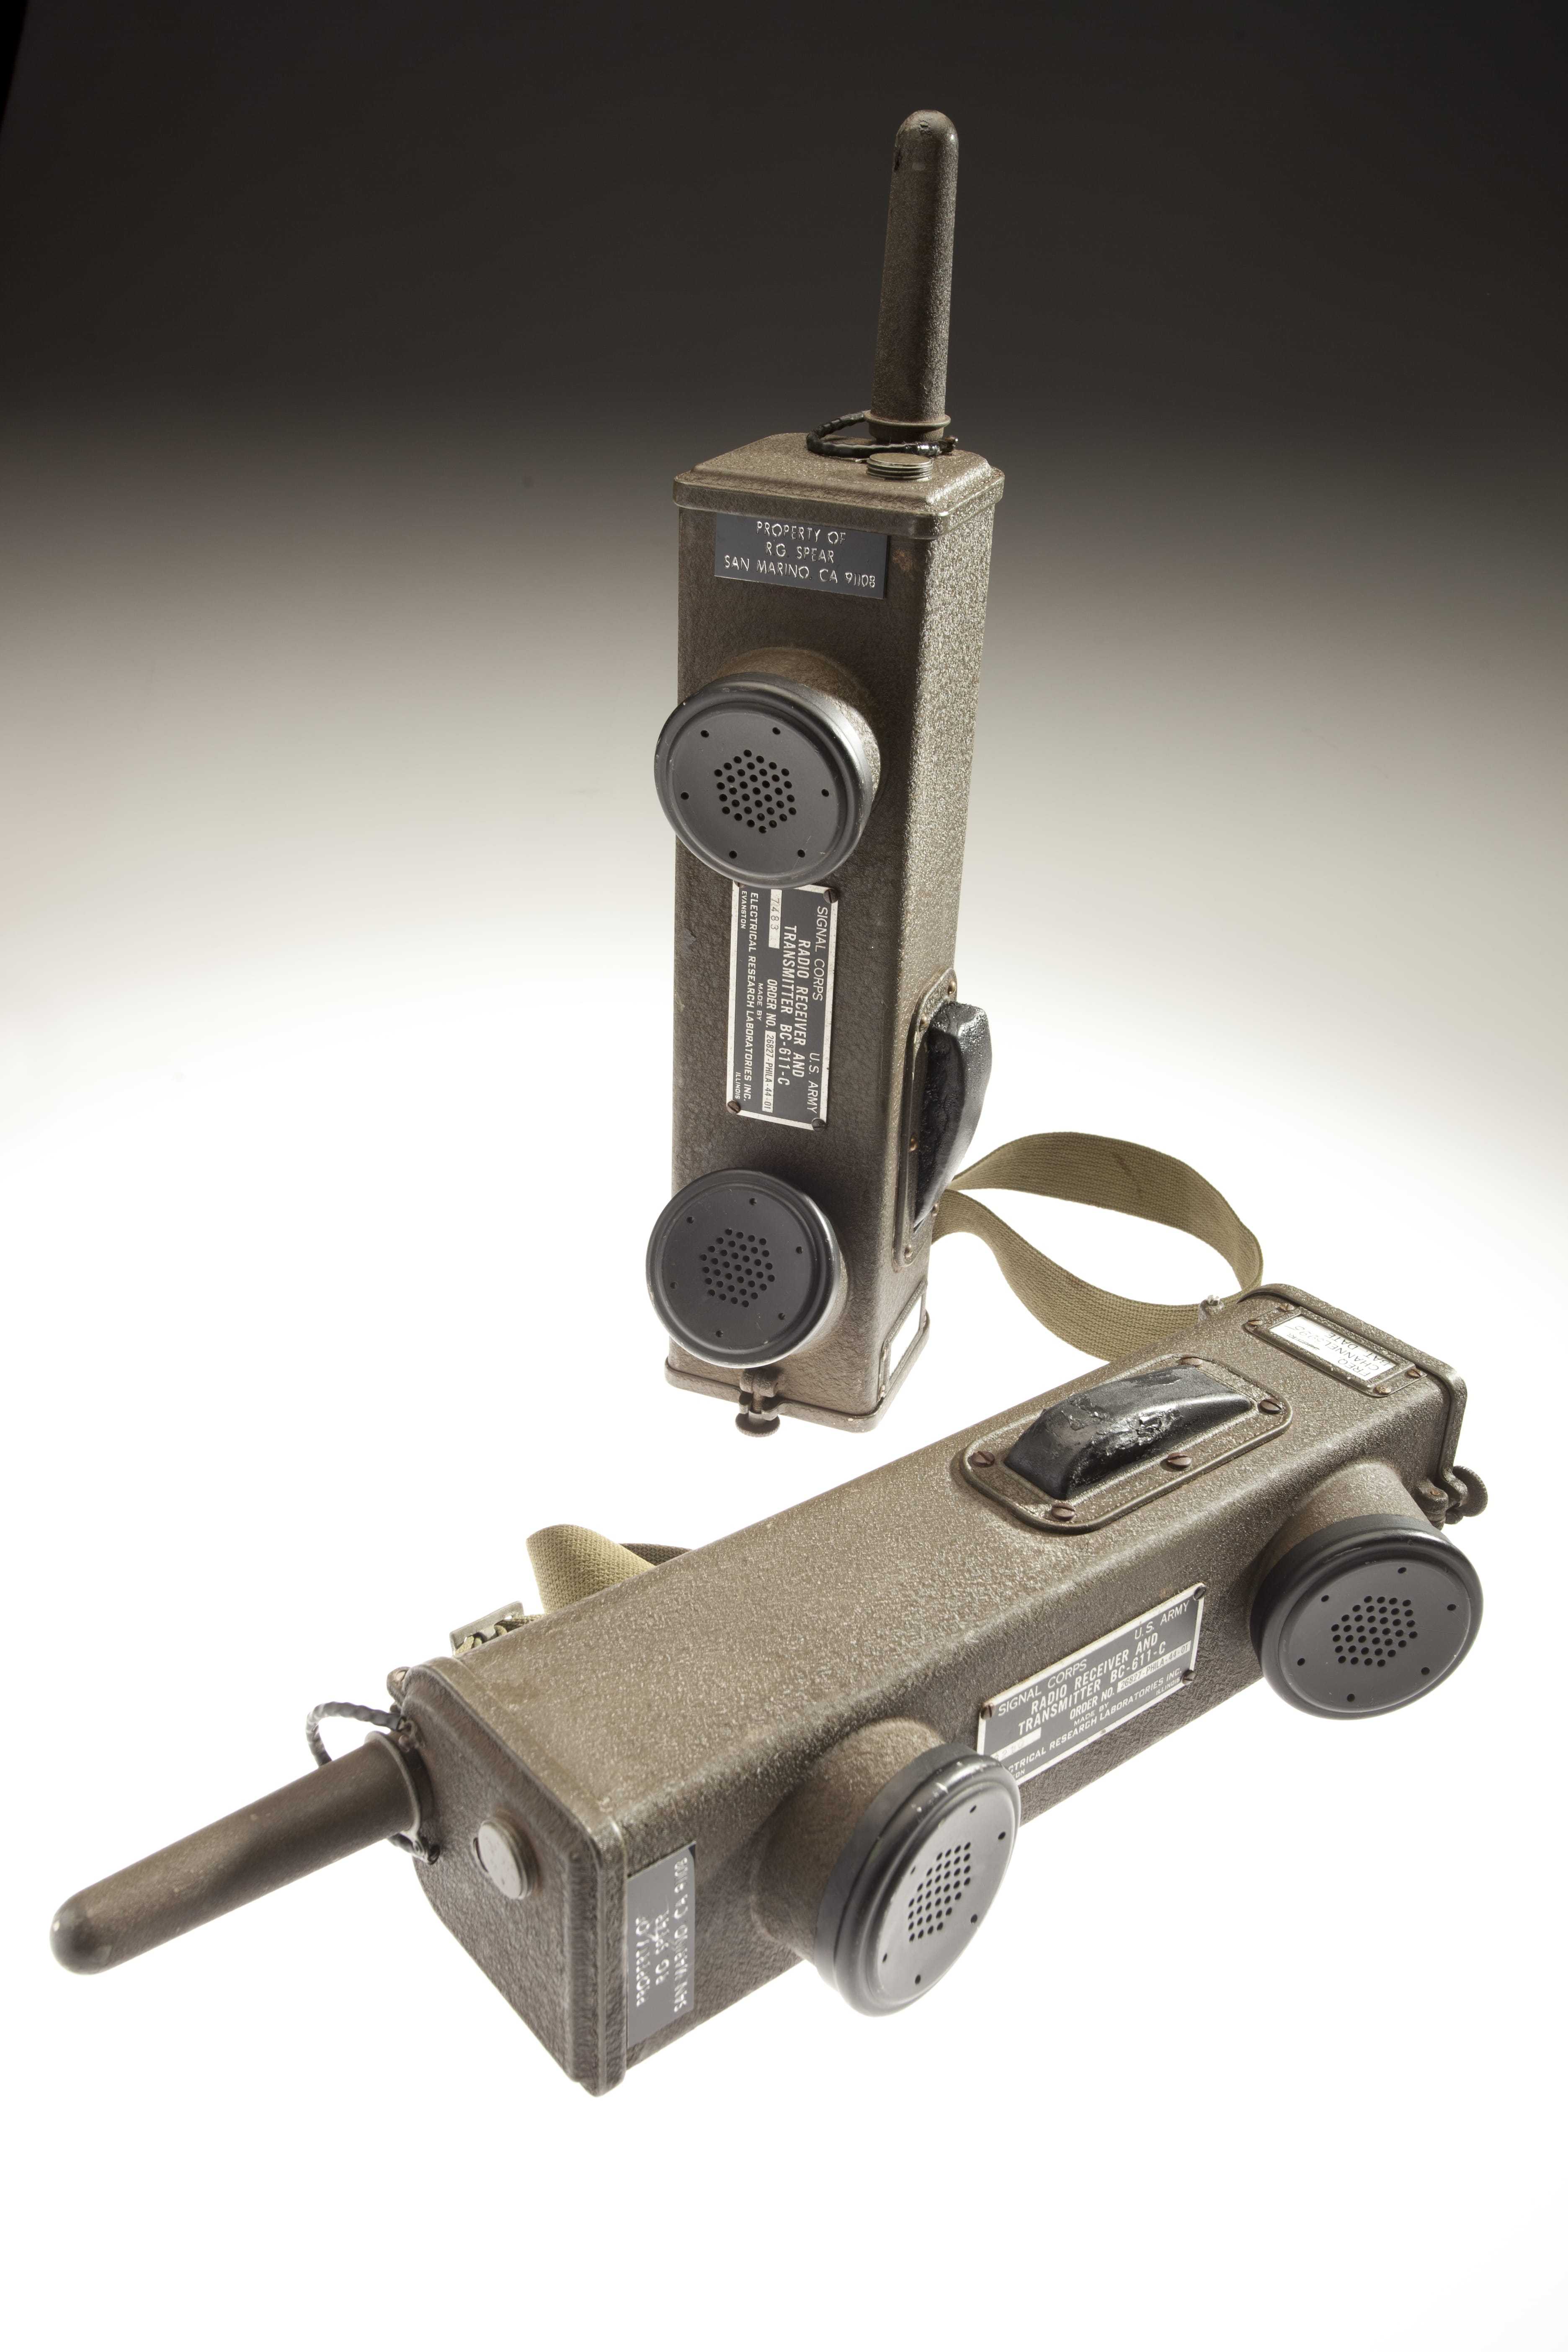 Two rectangular walkie-talkies, each with a mouthpiece and earpiece.